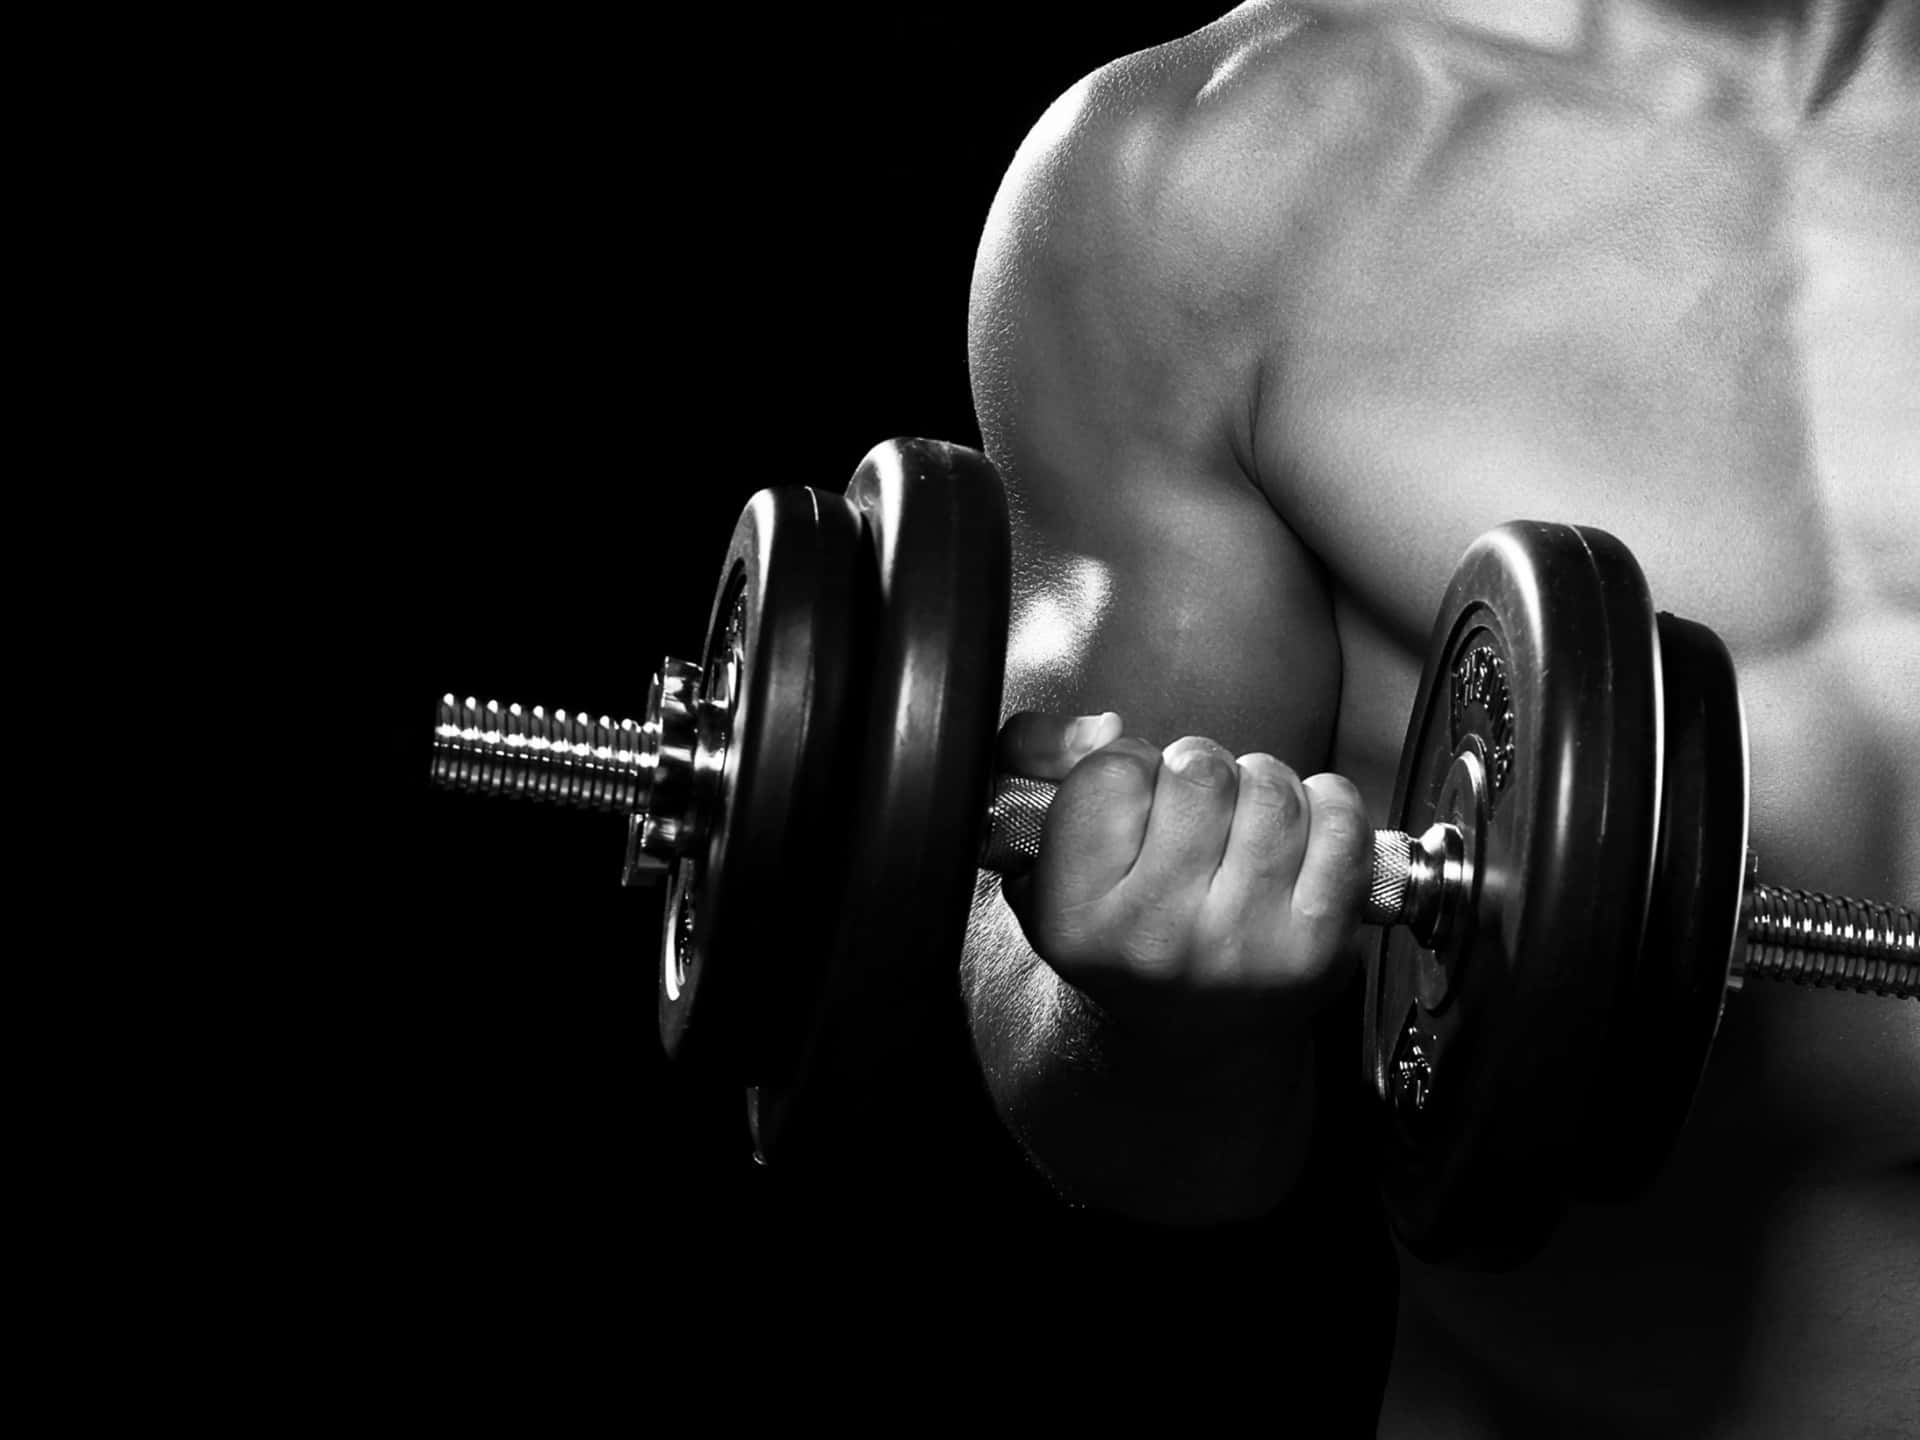 A Man Is Holding A Pair Of Dumbbells